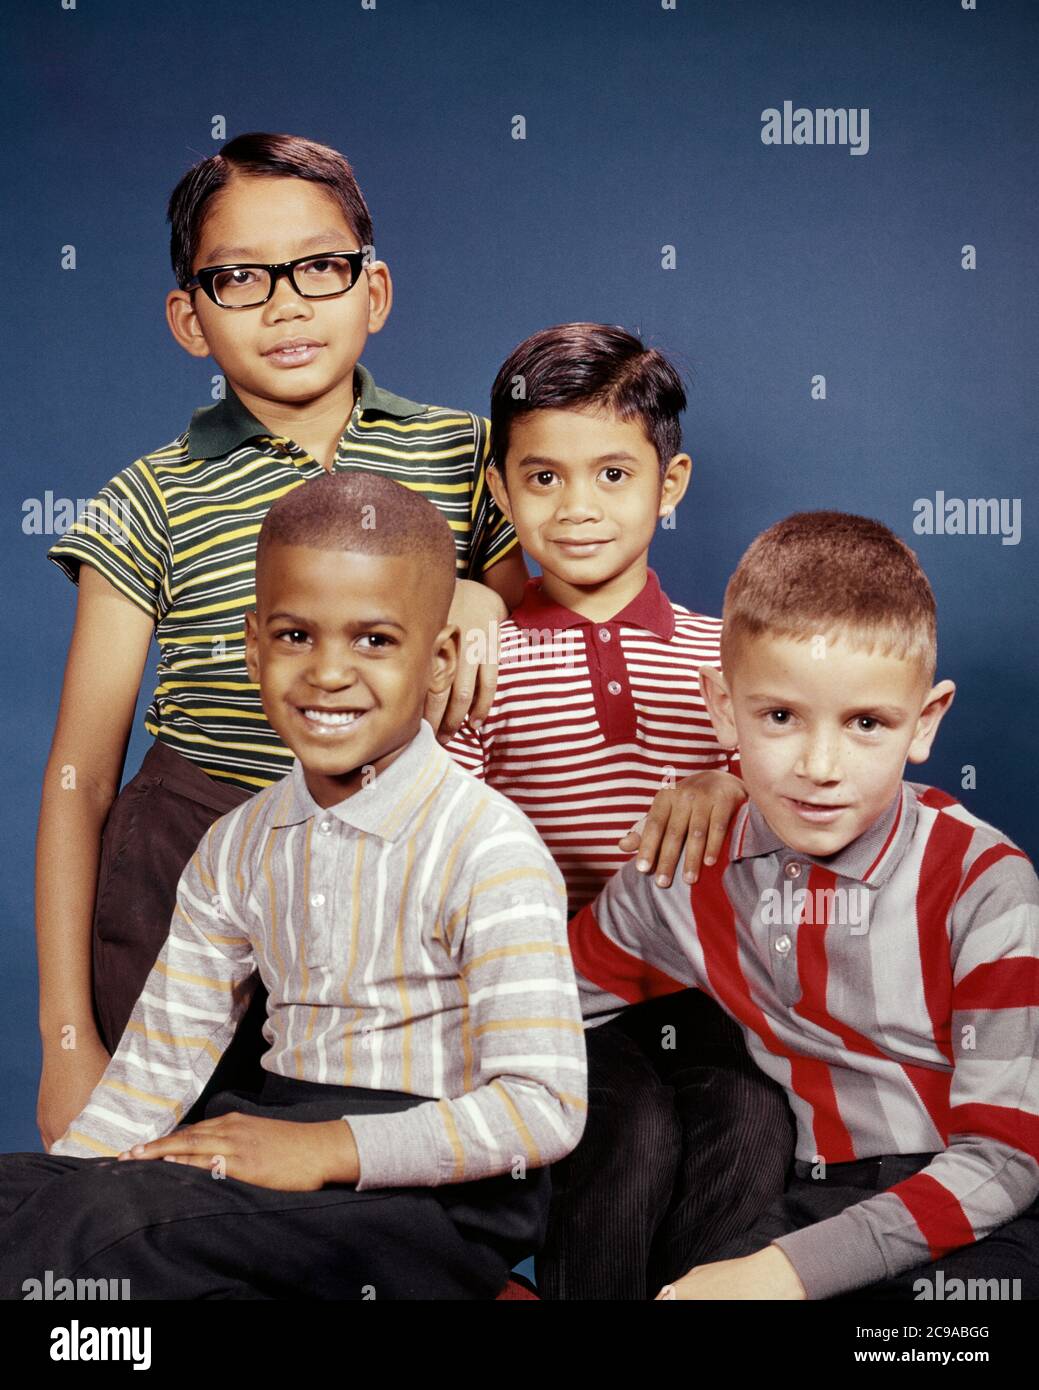 1960s PORTRAIT 4 BOYS IN STRIPED TEE SHIRTS ETHNIC RACIAL DIVERSITY ASIAN HISPANIC AFRICAN-AMERICAN CAUCASIAN LOOKING AT CAMERA - kj3810 HAR001 HARS COPY SPACE FRIENDSHIP HALF-LENGTH INSPIRATION RACIAL MALES EYE CONTACT HAPPINESS CHEERFUL ORIENTAL AFRICAN-AMERICANS AFRICAN-AMERICAN SHIRTS BLACK ETHNICITY PRIDE ASIAN AMERICAN SMILES FRIENDLY JOYFUL VARIOUS VARIED ASIAN-AMERICAN COOPERATION JUVENILES TOGETHERNESS CAUCASIAN ETHNICITY HAR001 HISPANIC ETHNICITY OLD FASHIONED AFRICAN AMERICANS Stock Photo